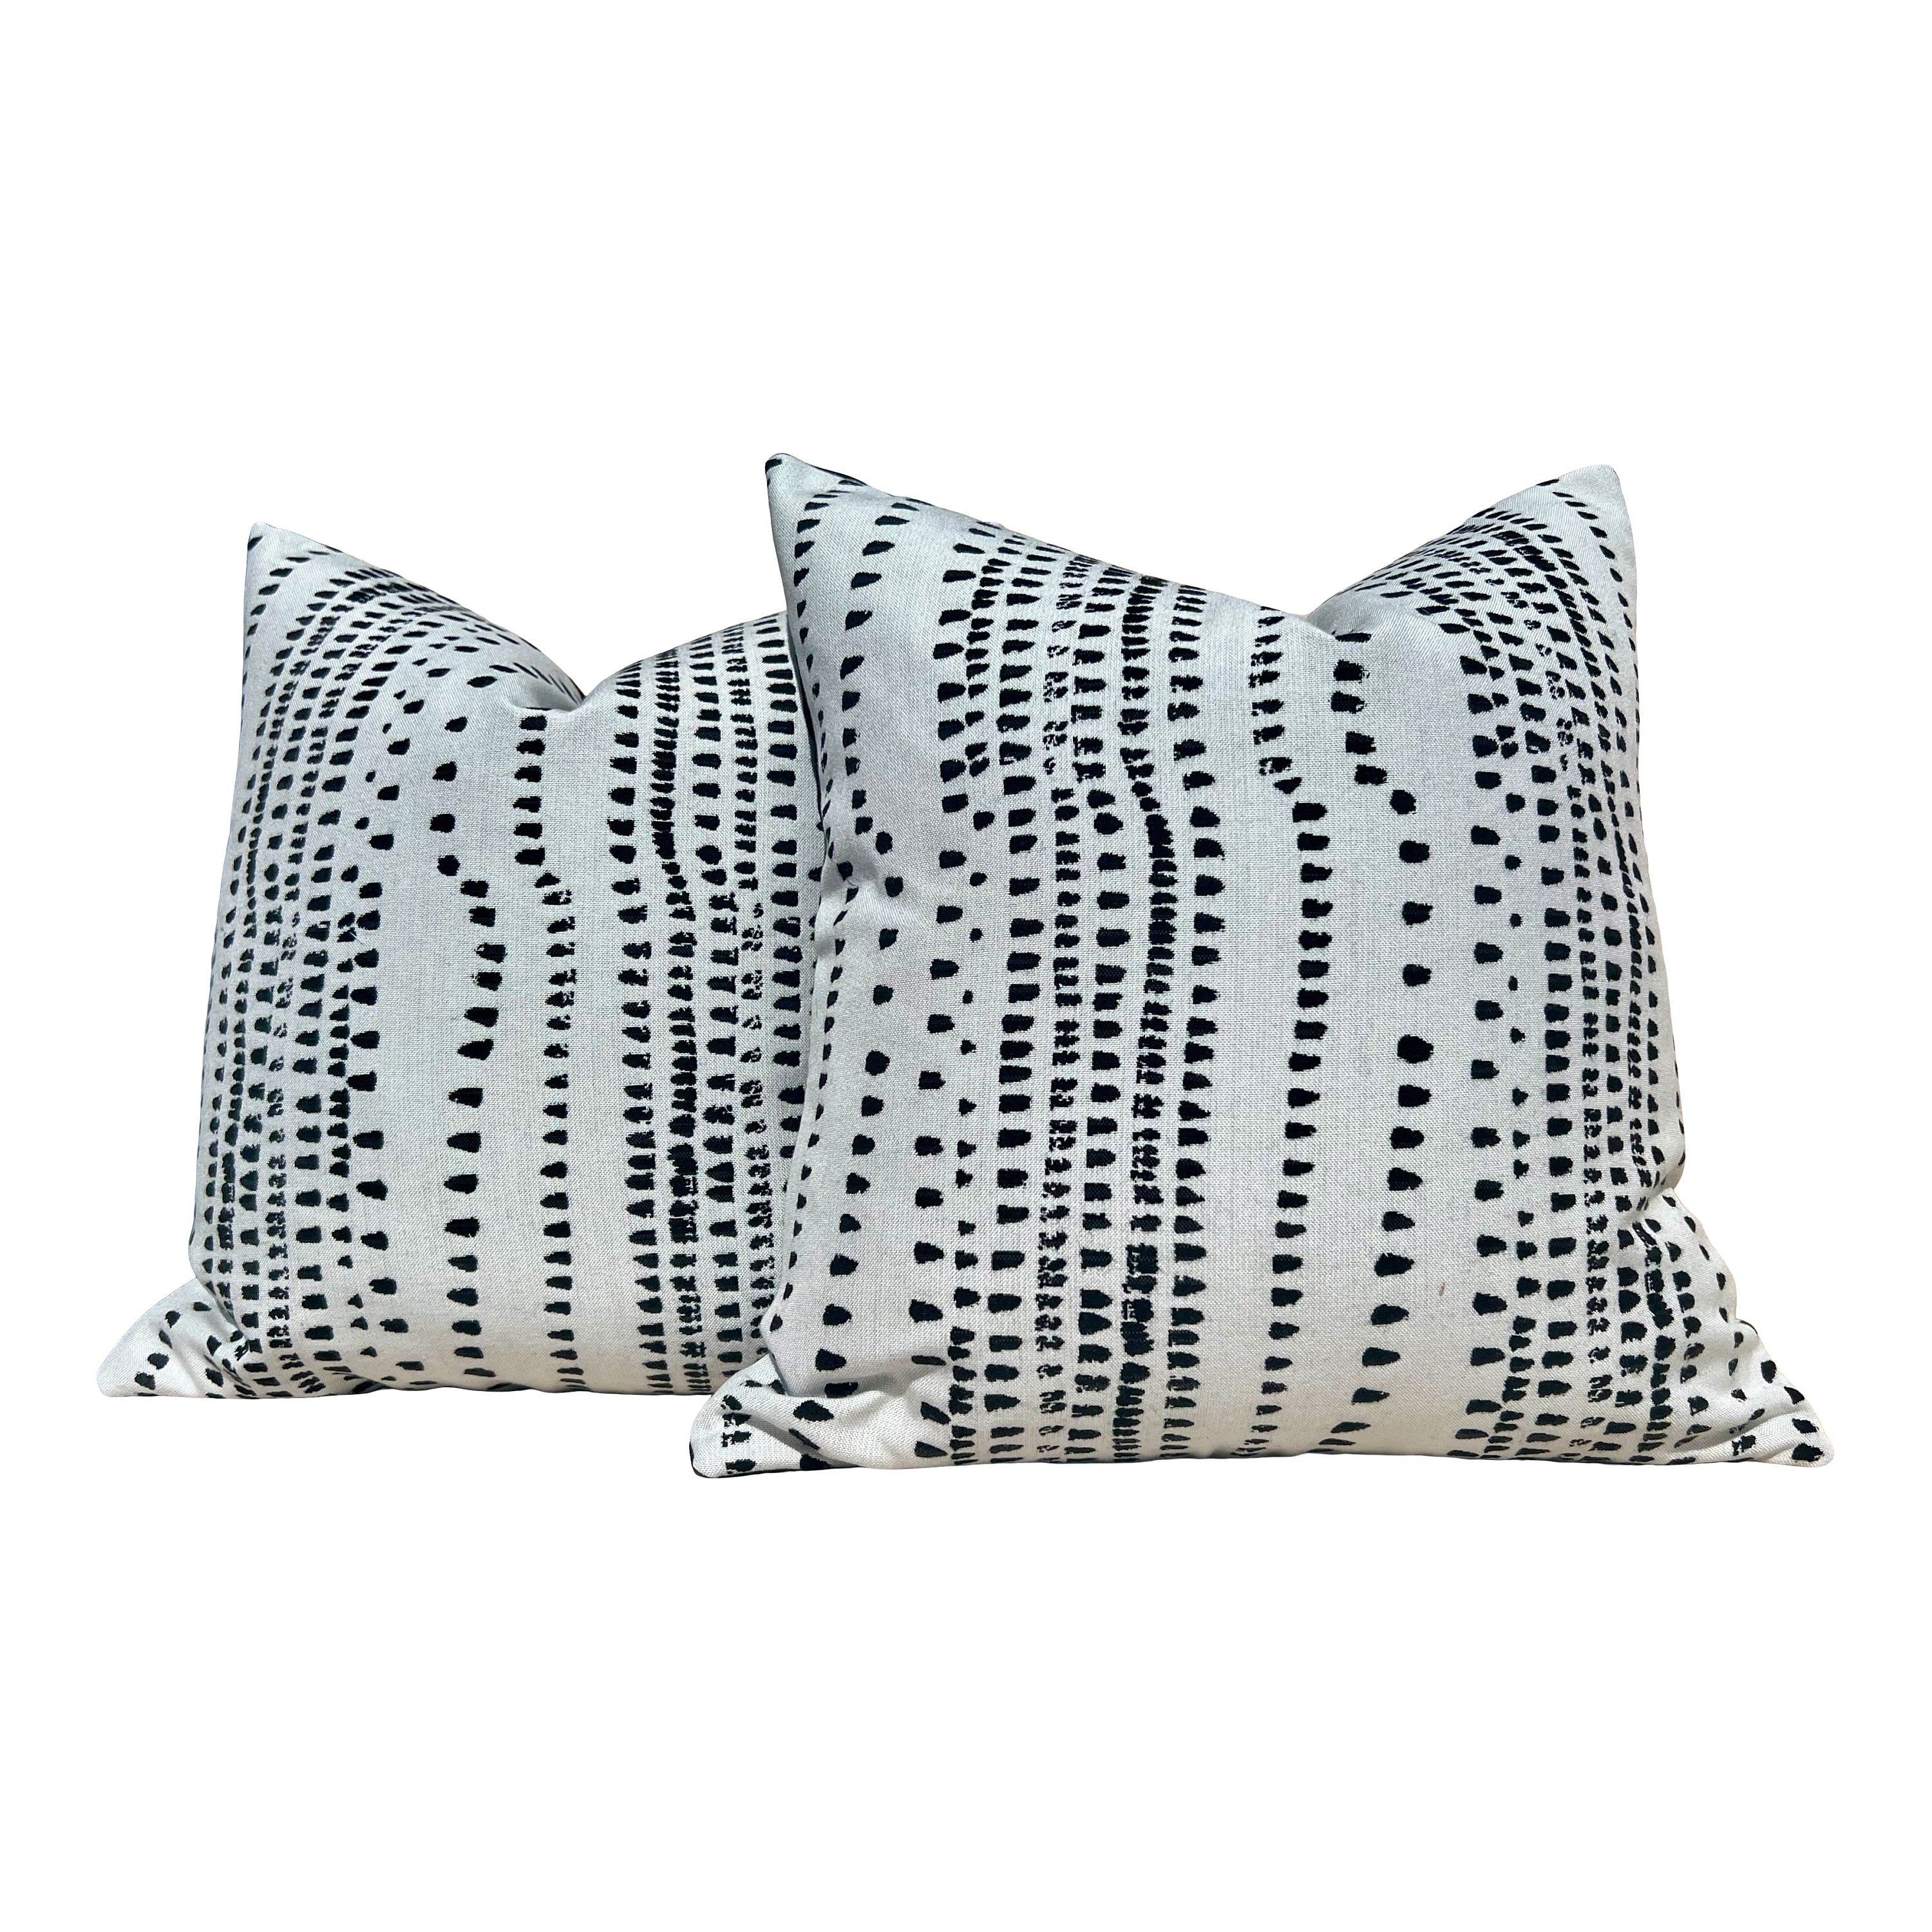 Outdoor Cape Town Pillow in Back and White. Outdoor Black Spotted Cushion Cover, Striped Black and White Throw Outdoor Pillow Cover